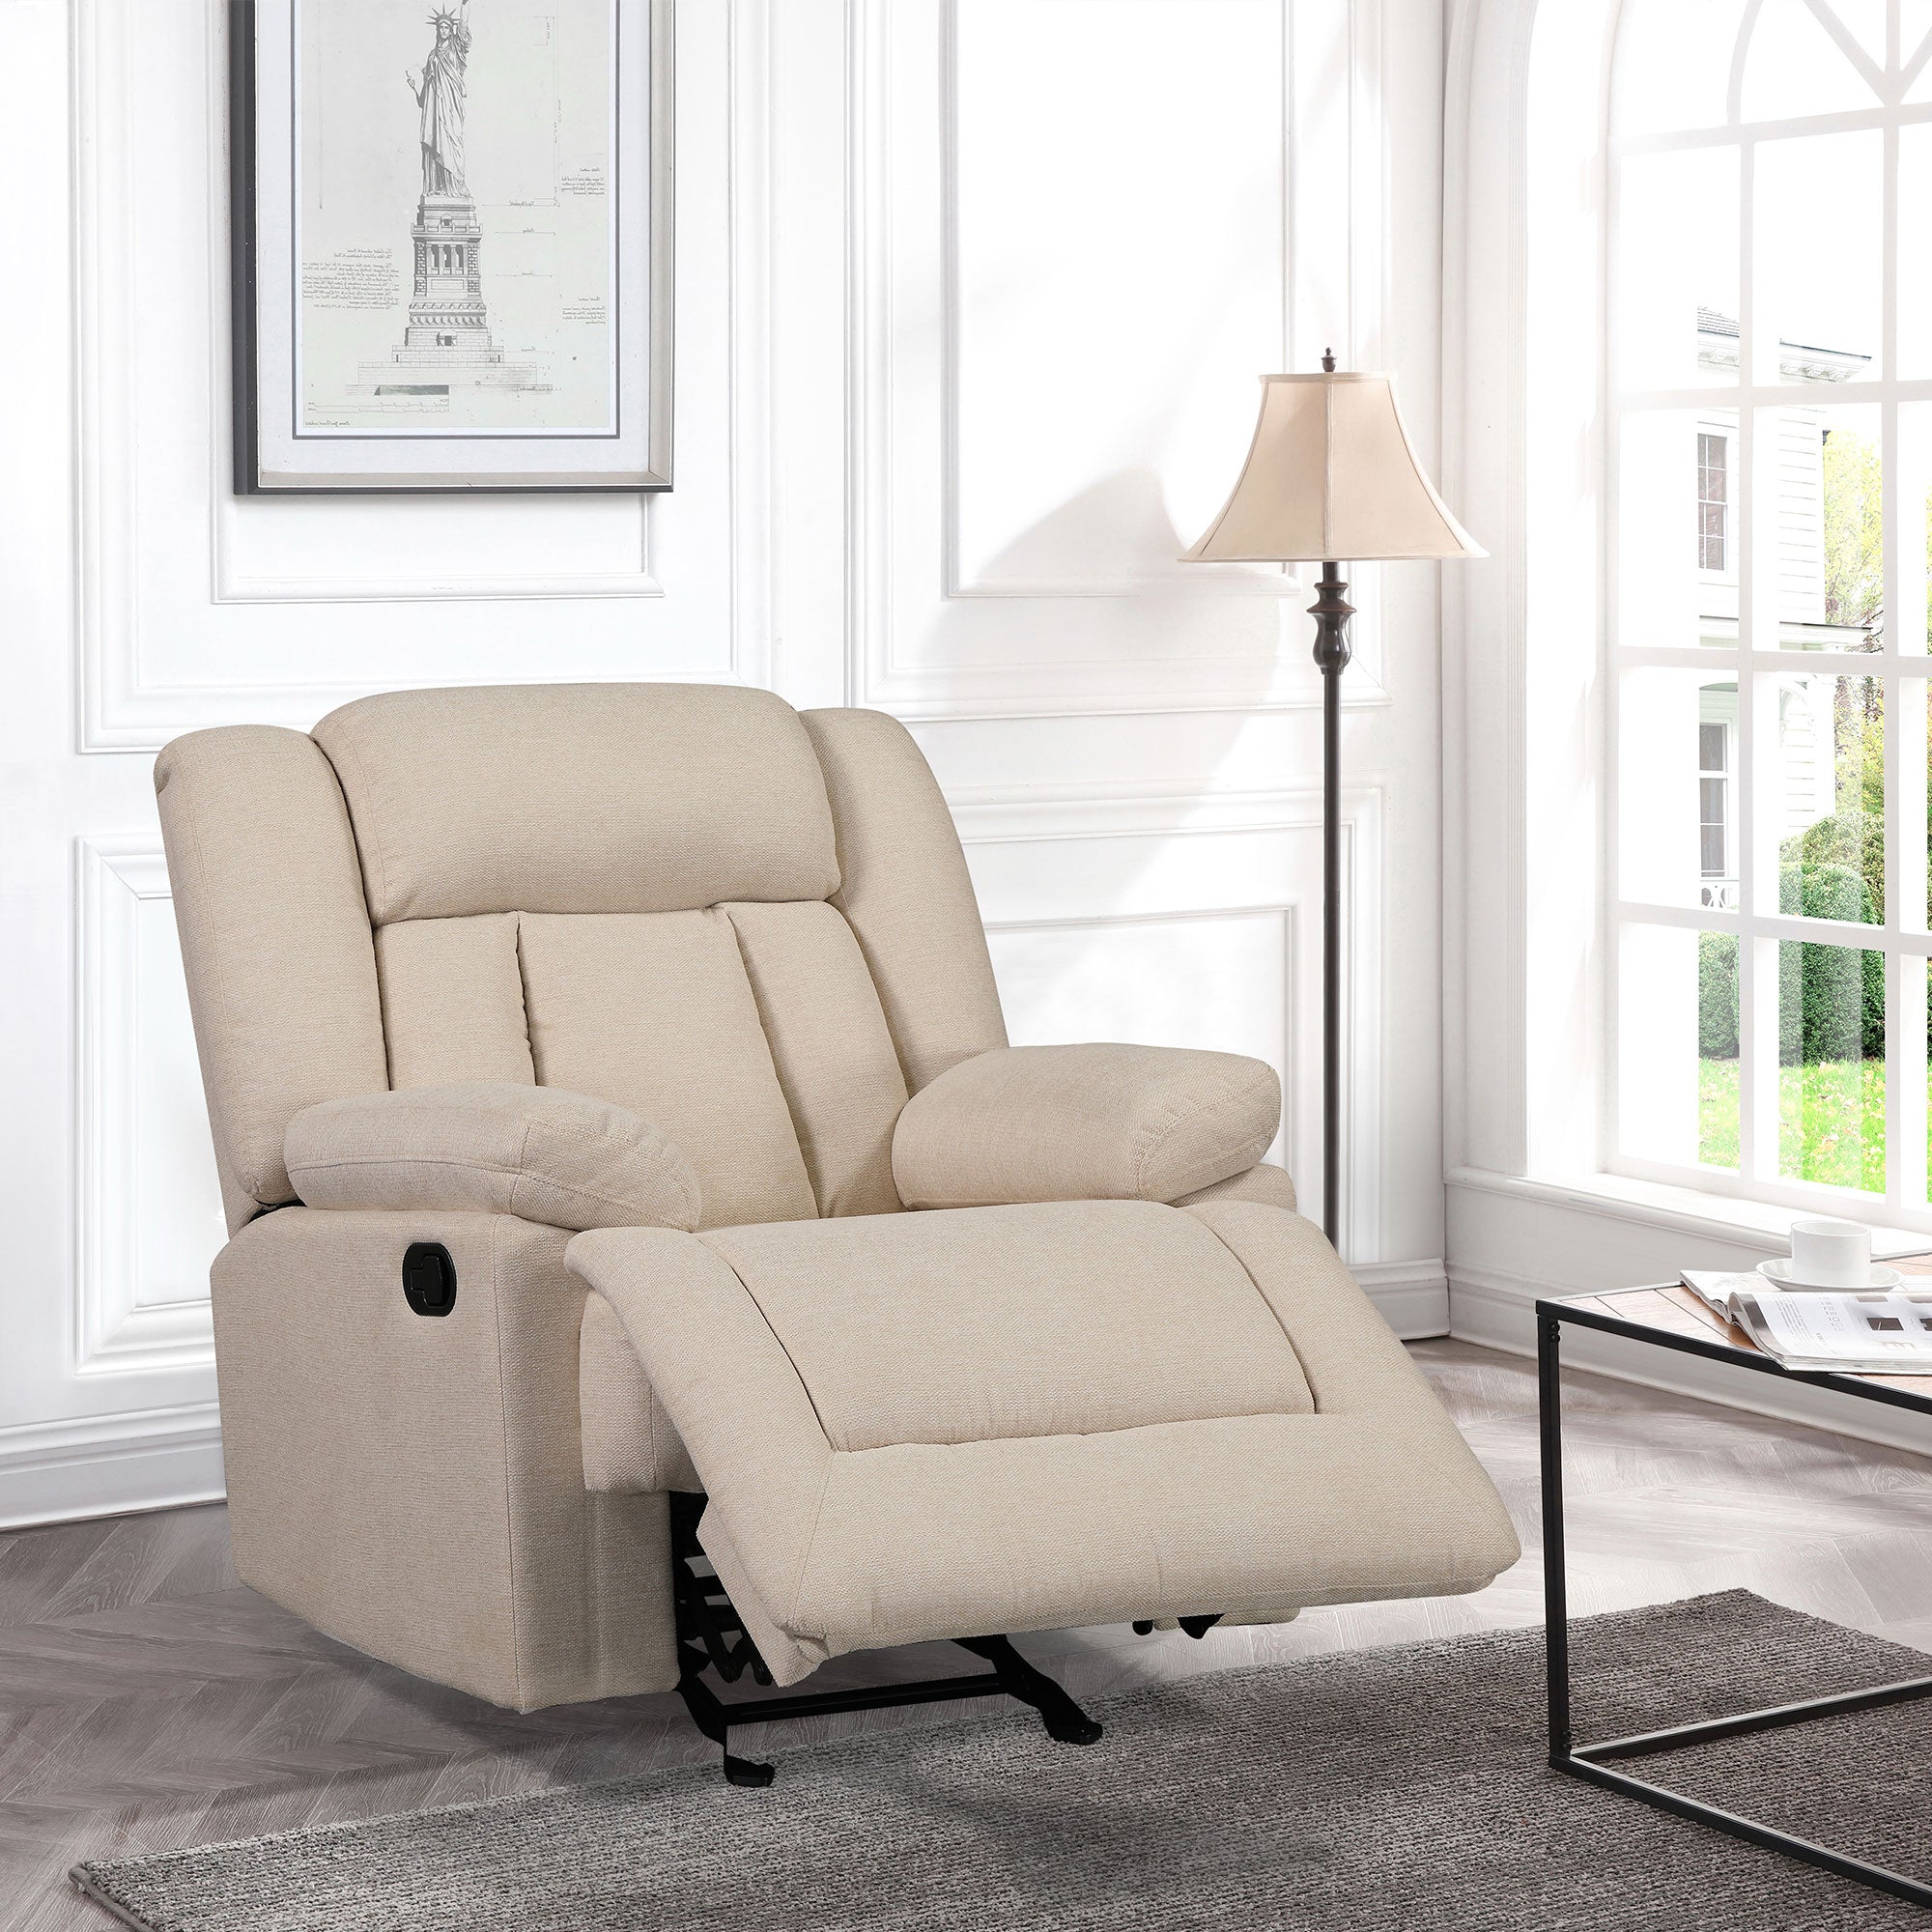 Fabric Single Recliner with Thick Seat and Backrest-Boyel Living